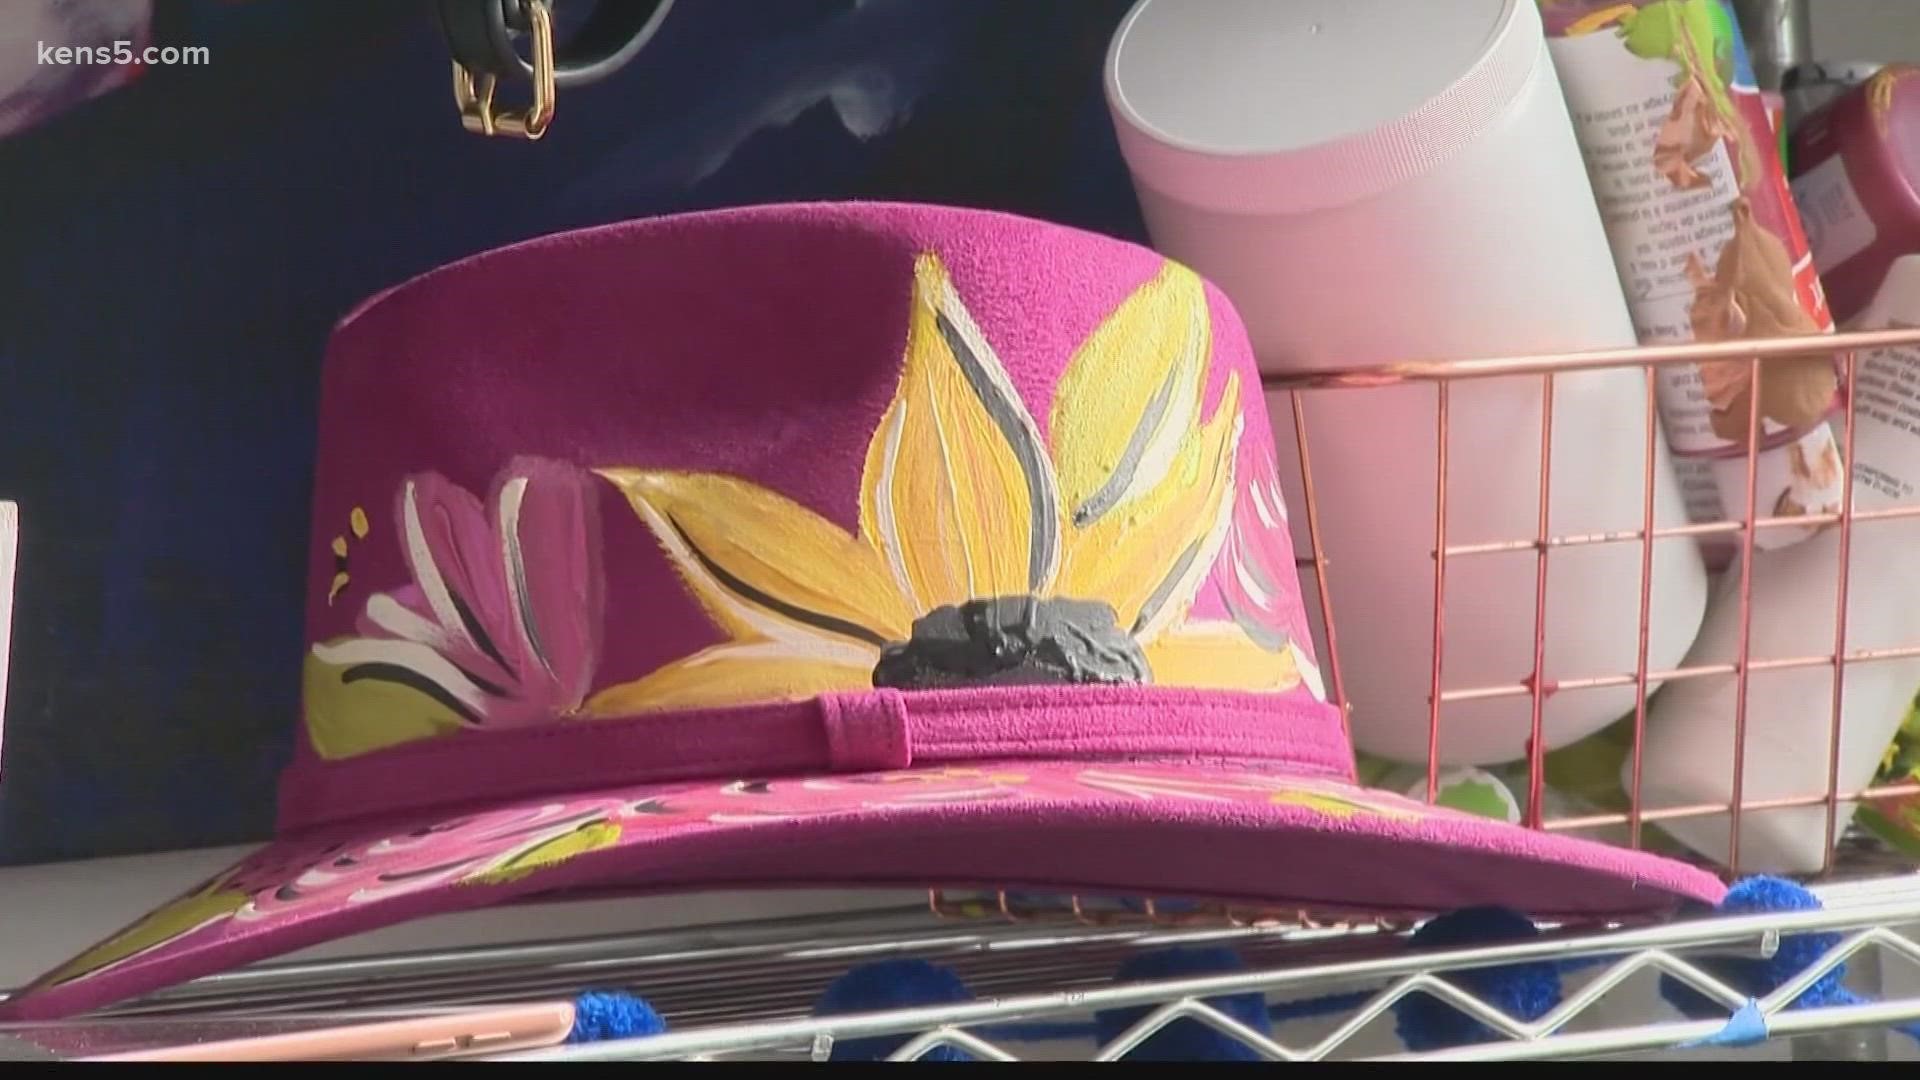 An unexpected canvas creates a colorful opportunity for one San Antonio woman.